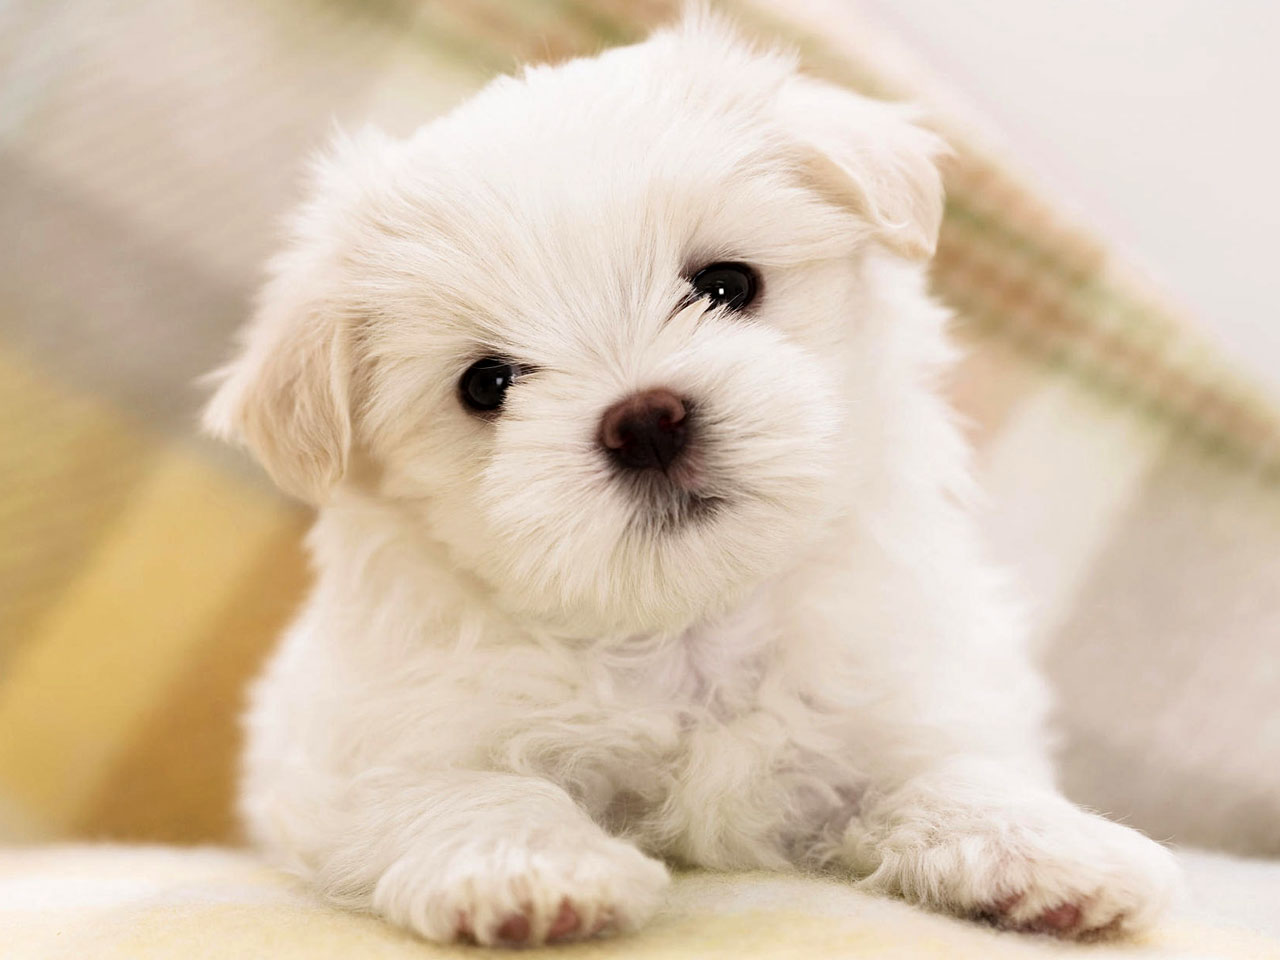 Puppy World Really Cute Pictures Wallpaper With Dogs And Puppies